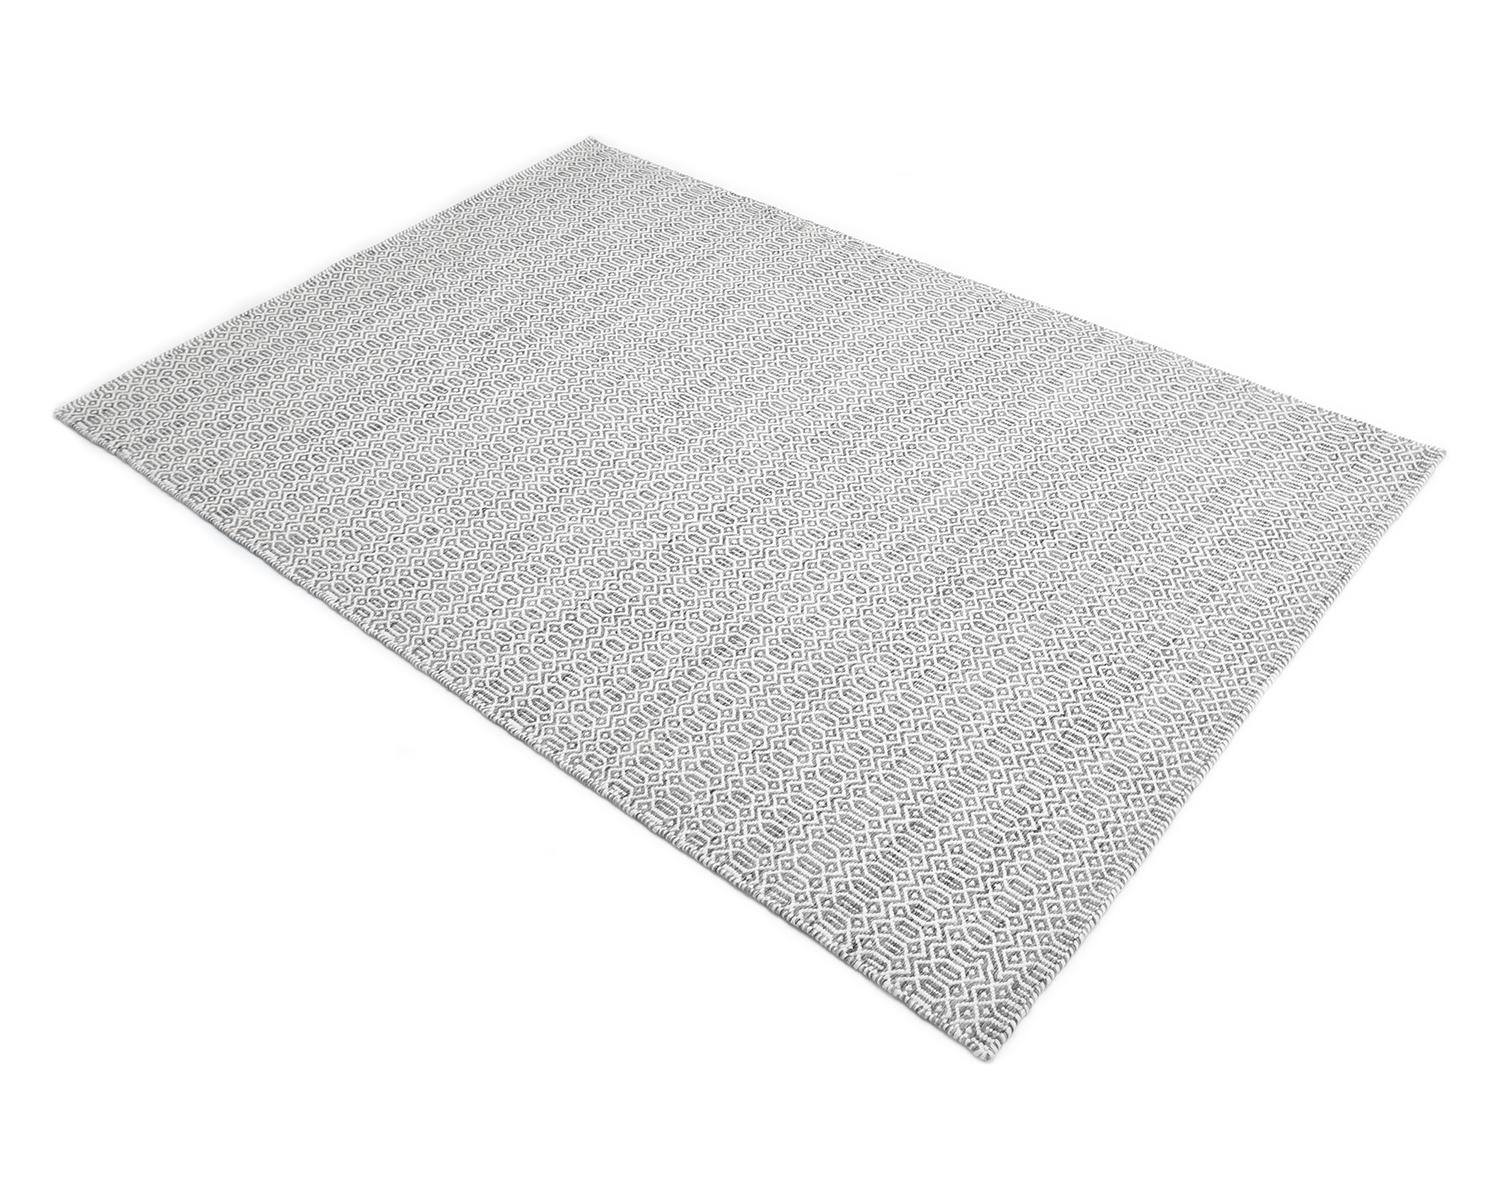 Wool Chatham, Transitional Flat-Weave Handwoven Area Rug, Alabaster For Sale